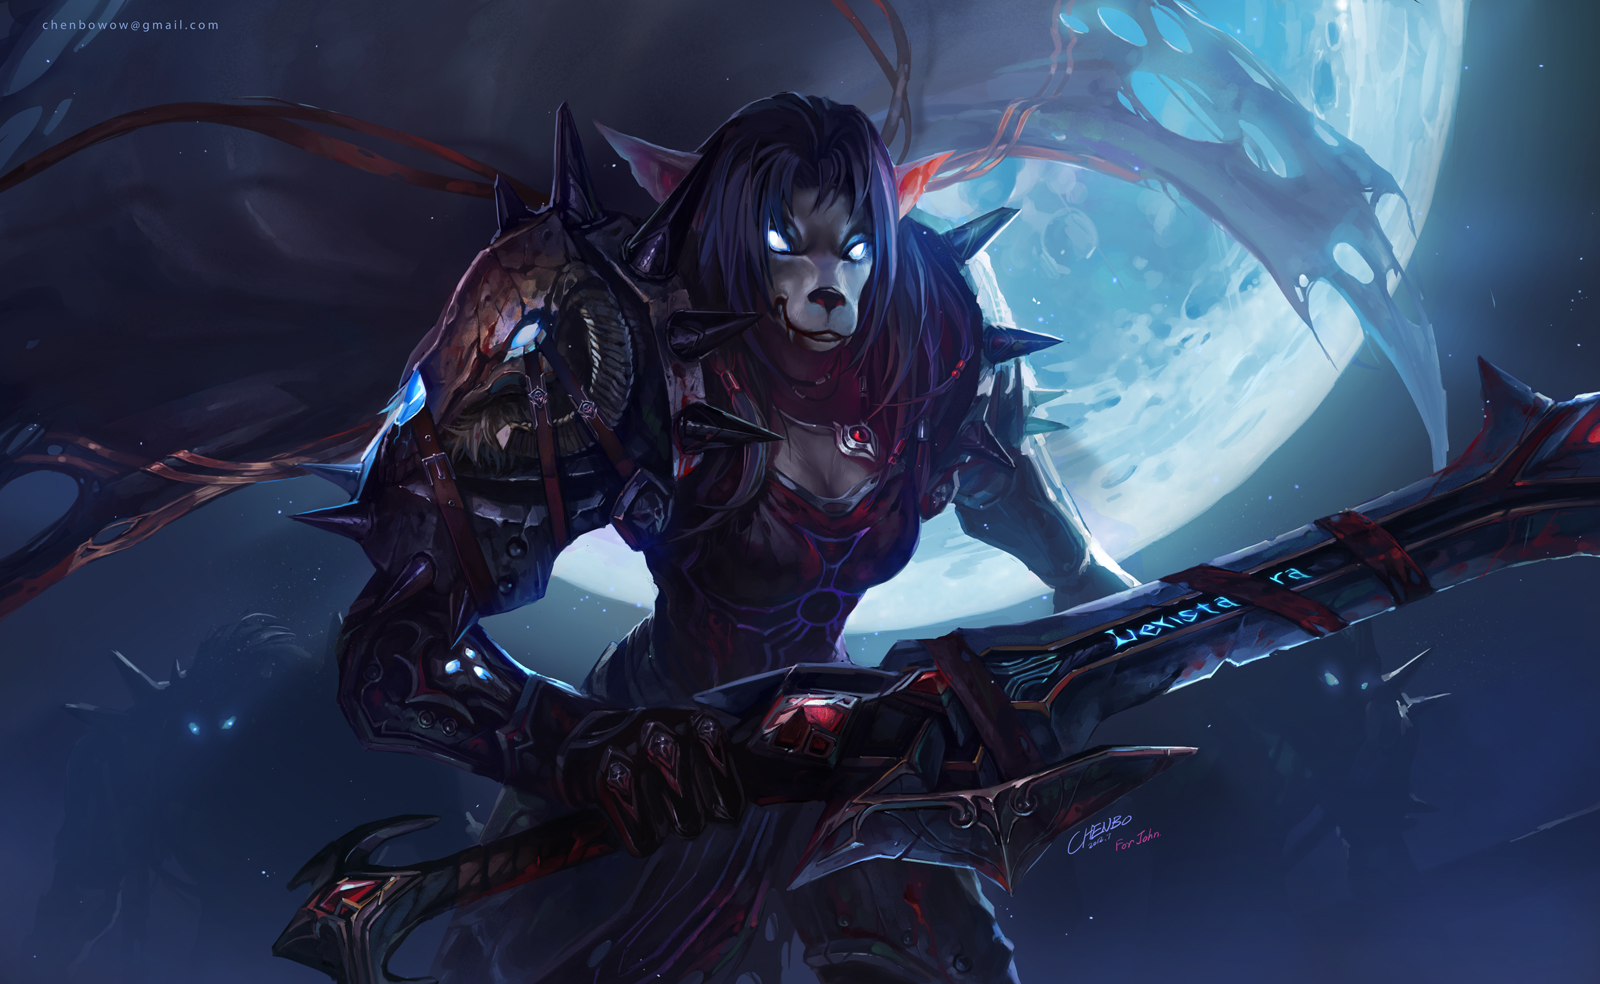 General 1600x984 Chenbo fantasy art Warcraft World of Warcraft weapon cleavage pointy ears glowing eyes long hair blue eyes blue hair sword Moon moonlight sky coats armor